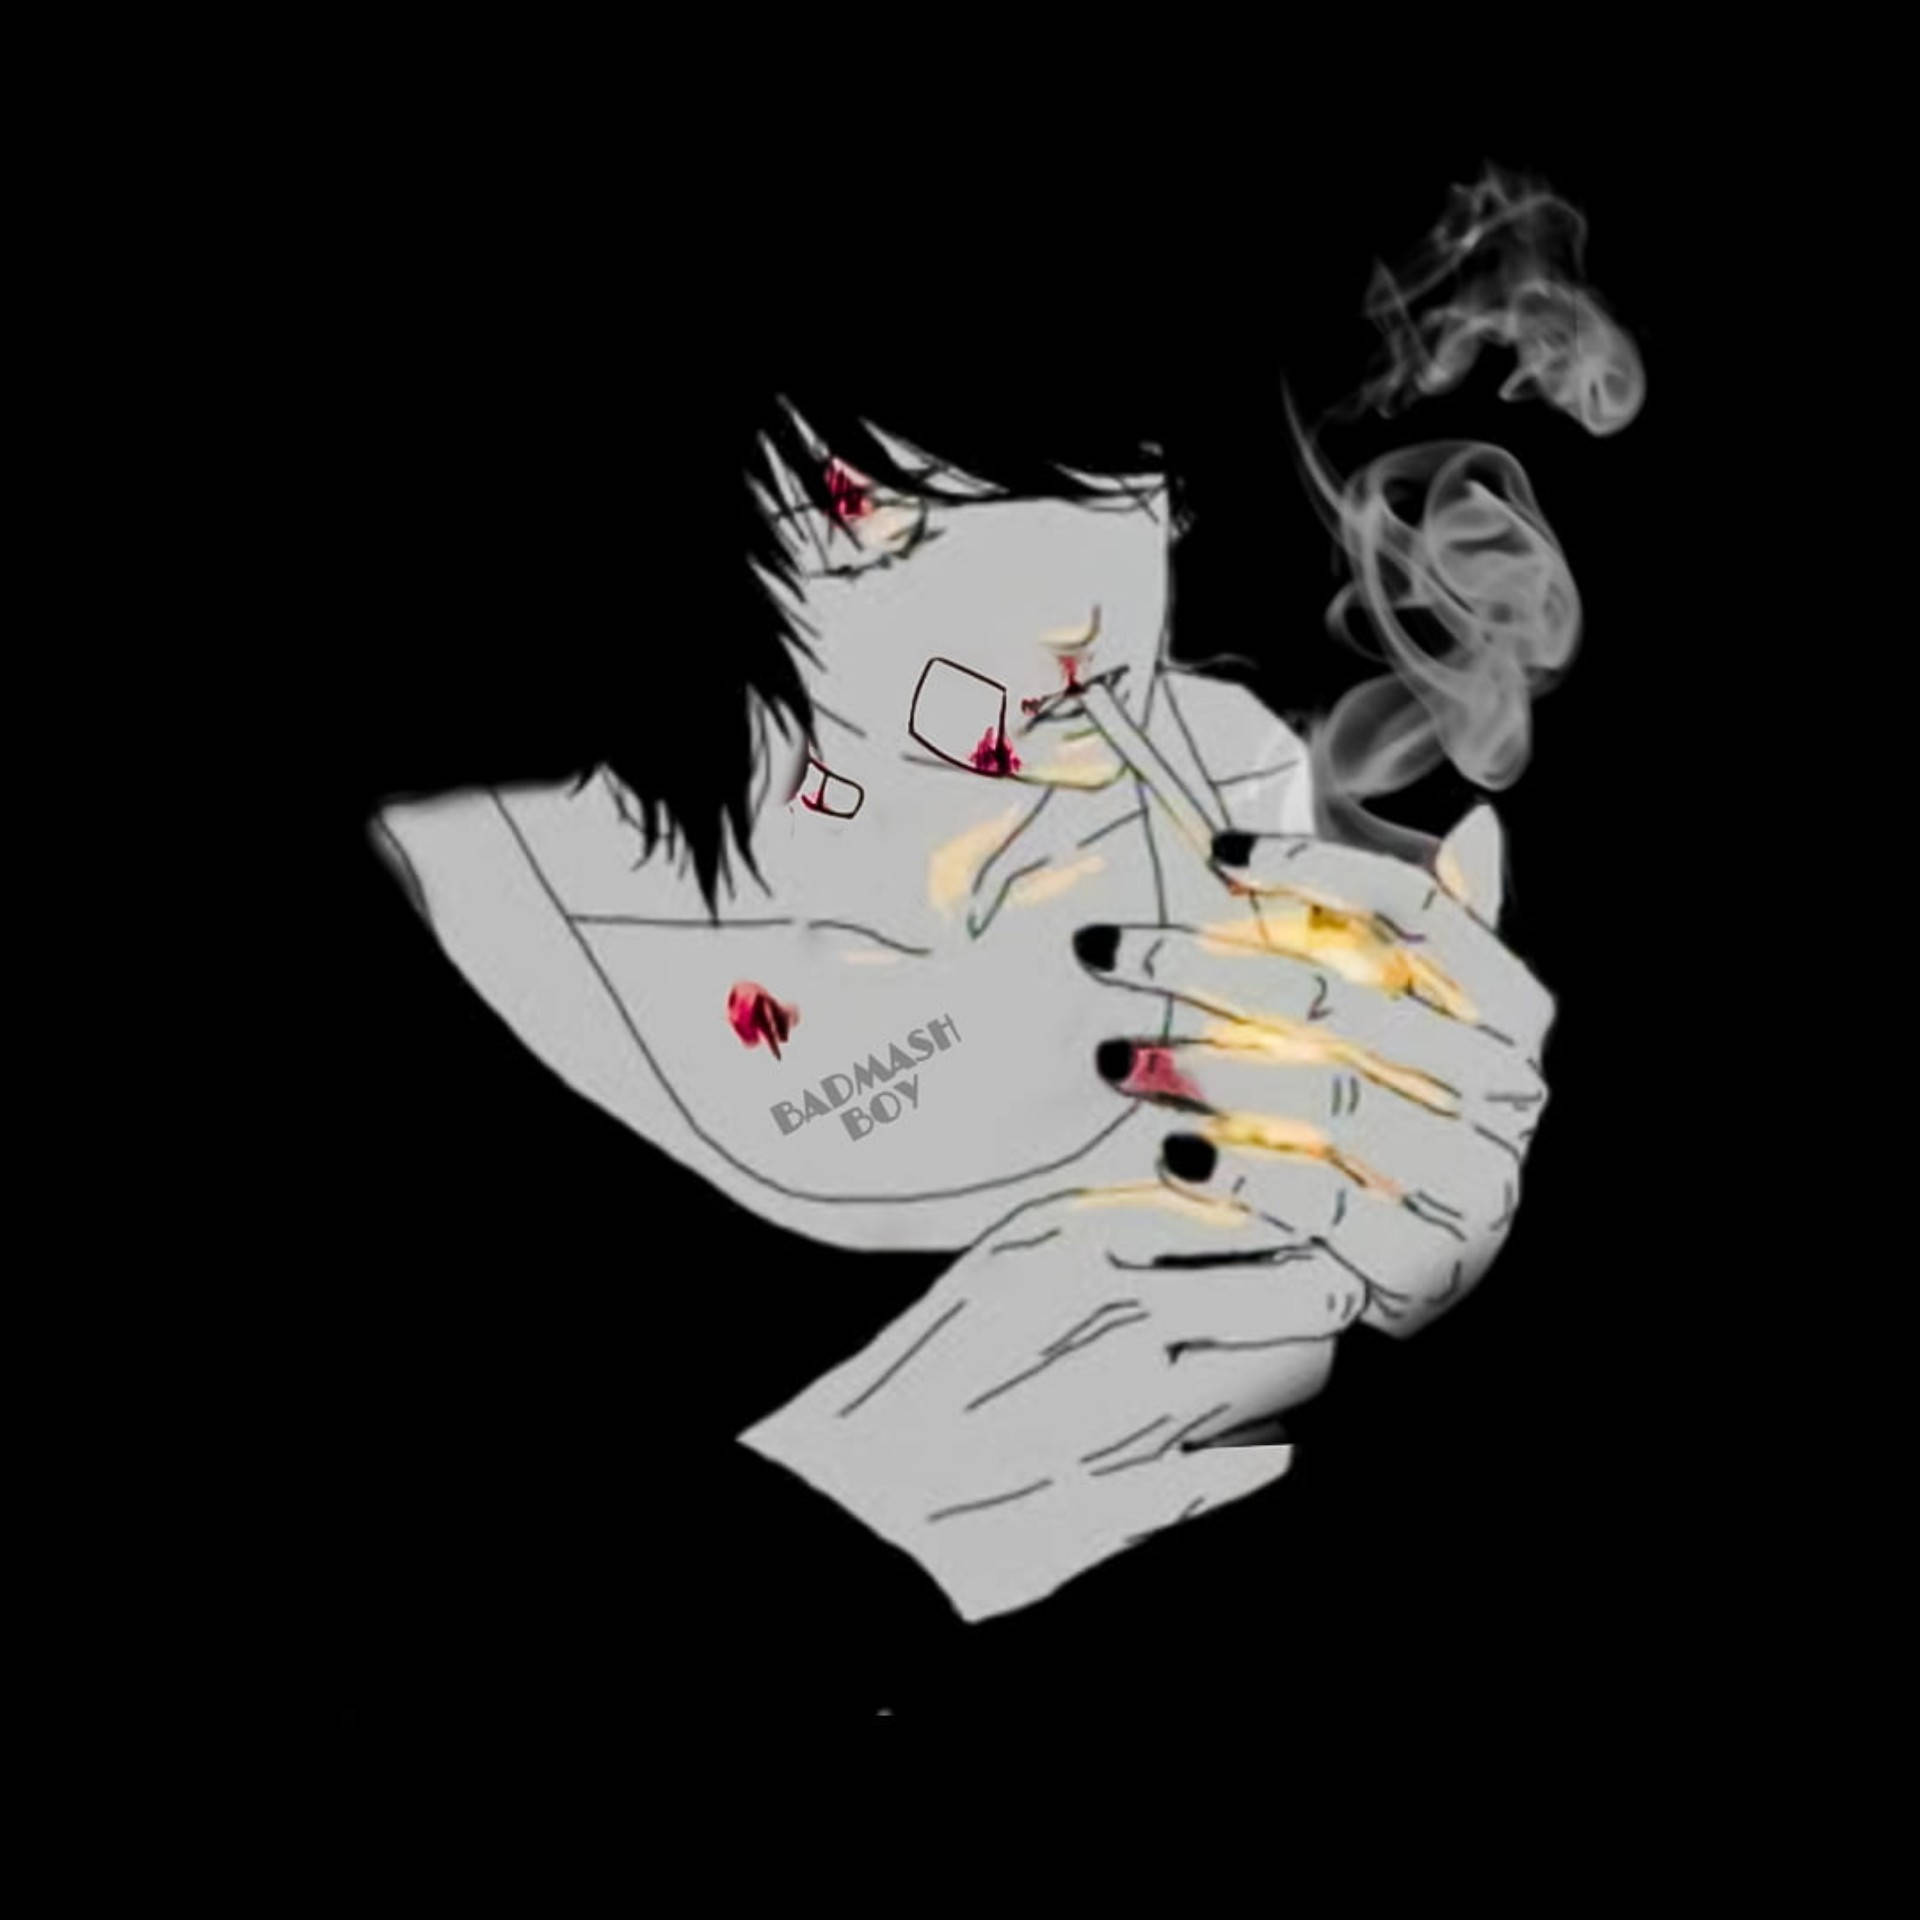 Cigarette Addict Anime Characters Who Should Not Be Imitated – Reid Hansabi